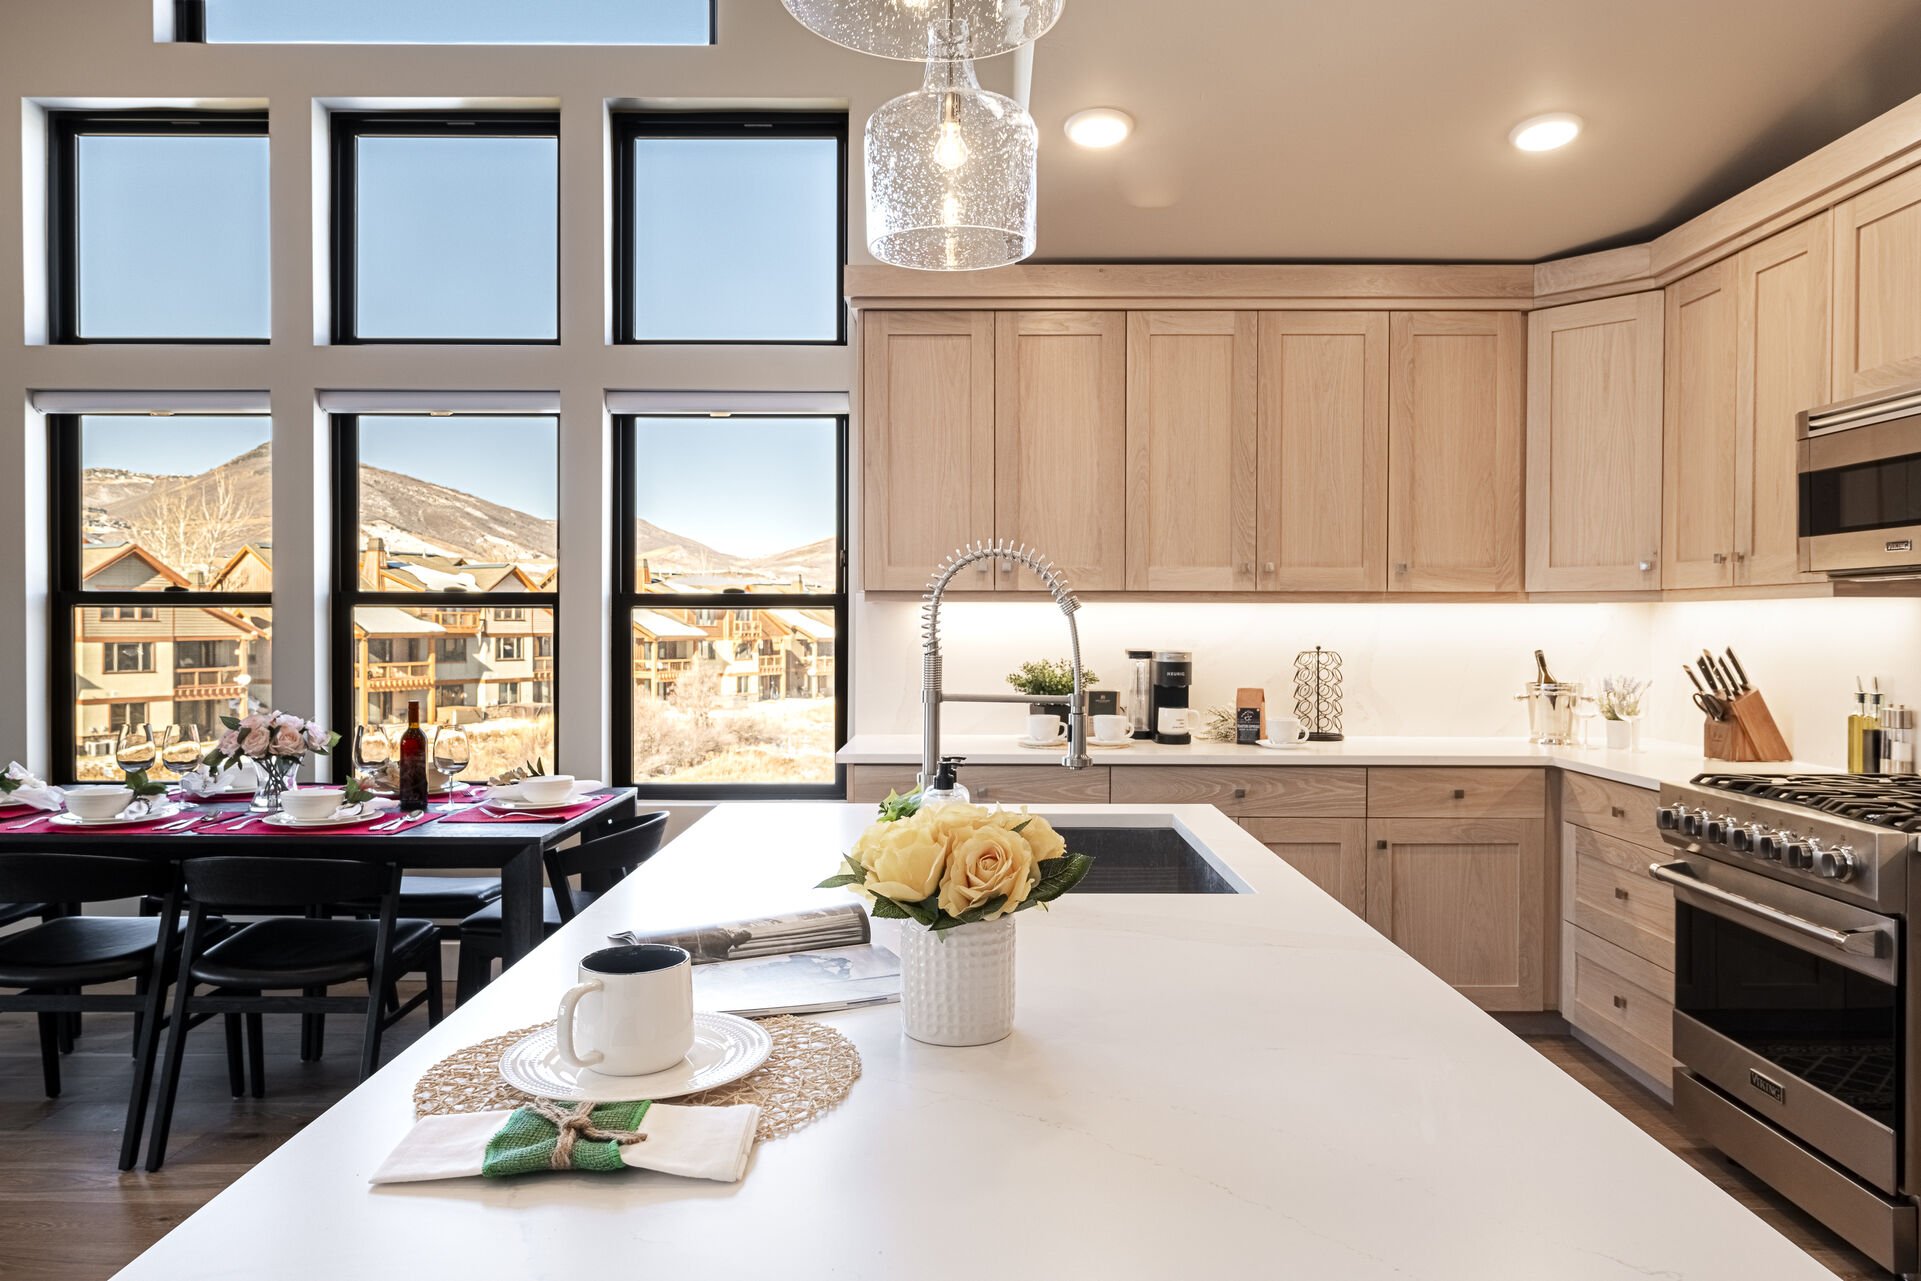 Chef's kitchen with a ski resort mountain backdrop